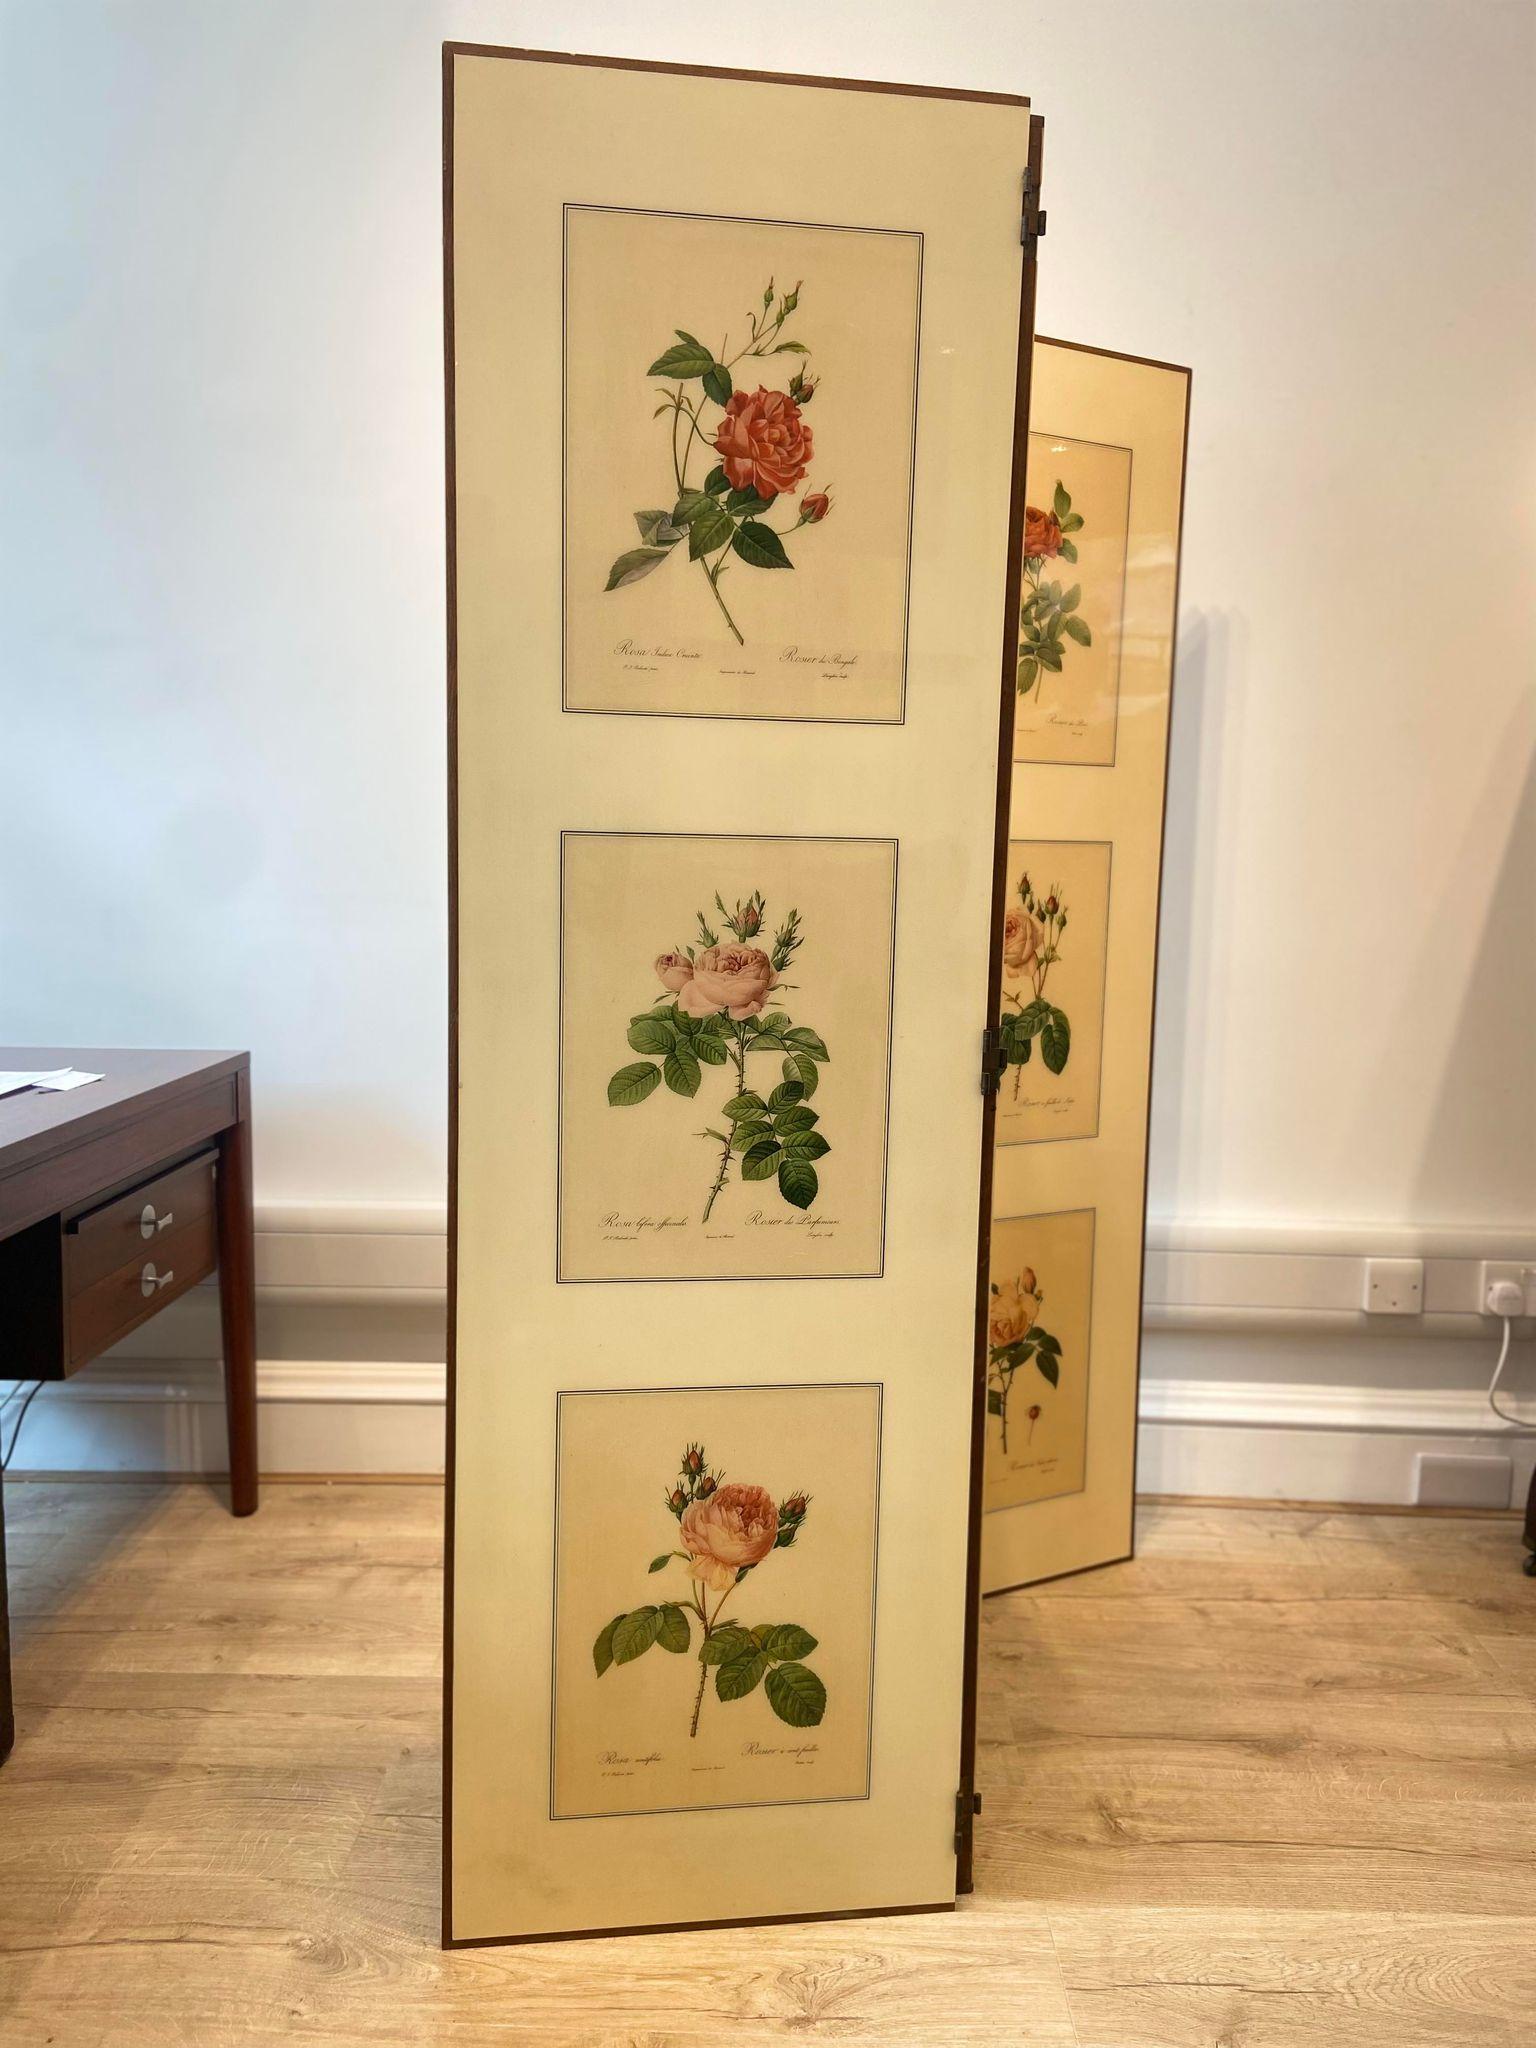 A 1950's 3 panel folding screen / room divider with Victorian botanical lithographs. 

Dimensions: 
Height: 170 cm 
Width: 50 cm per panel 
Depth: 2 cm 